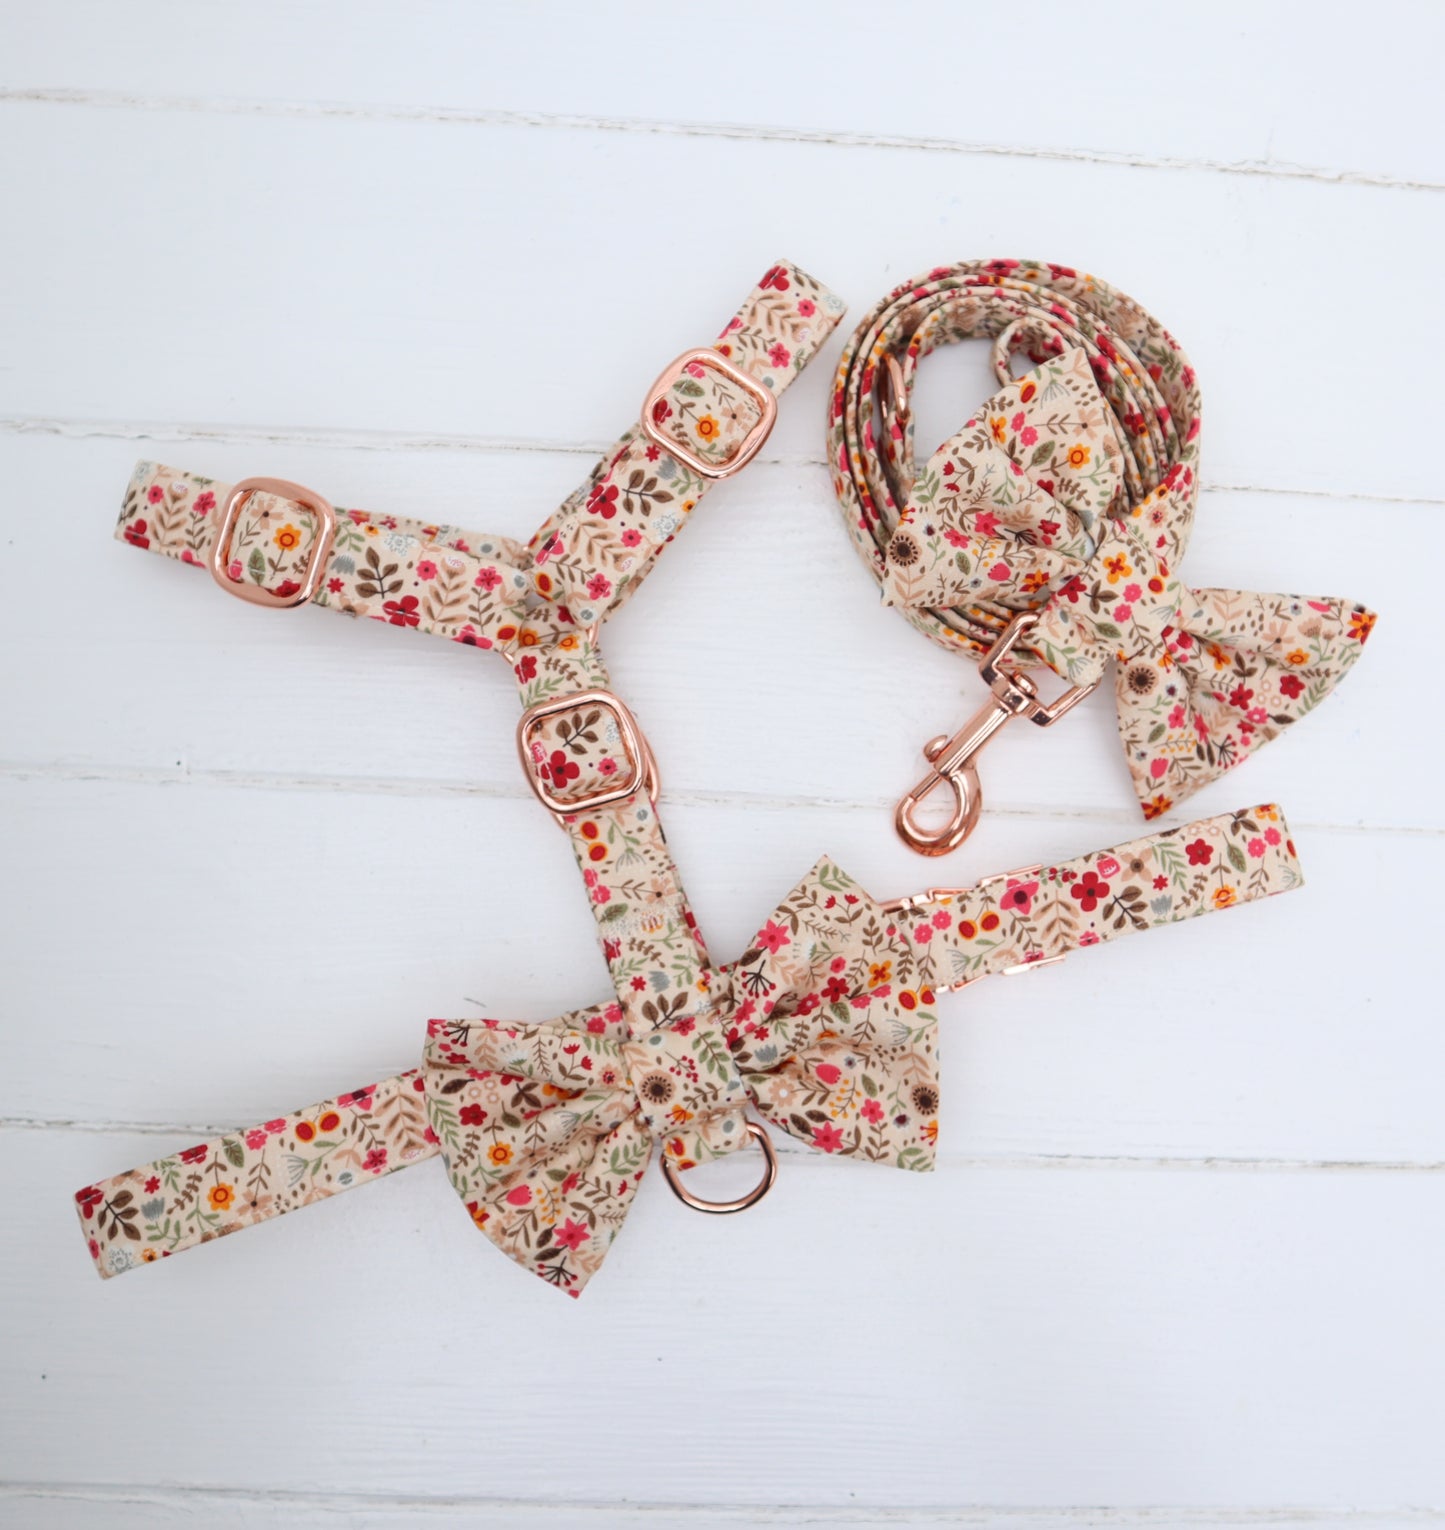 Dog Harness in Autumn Fall Floral Design